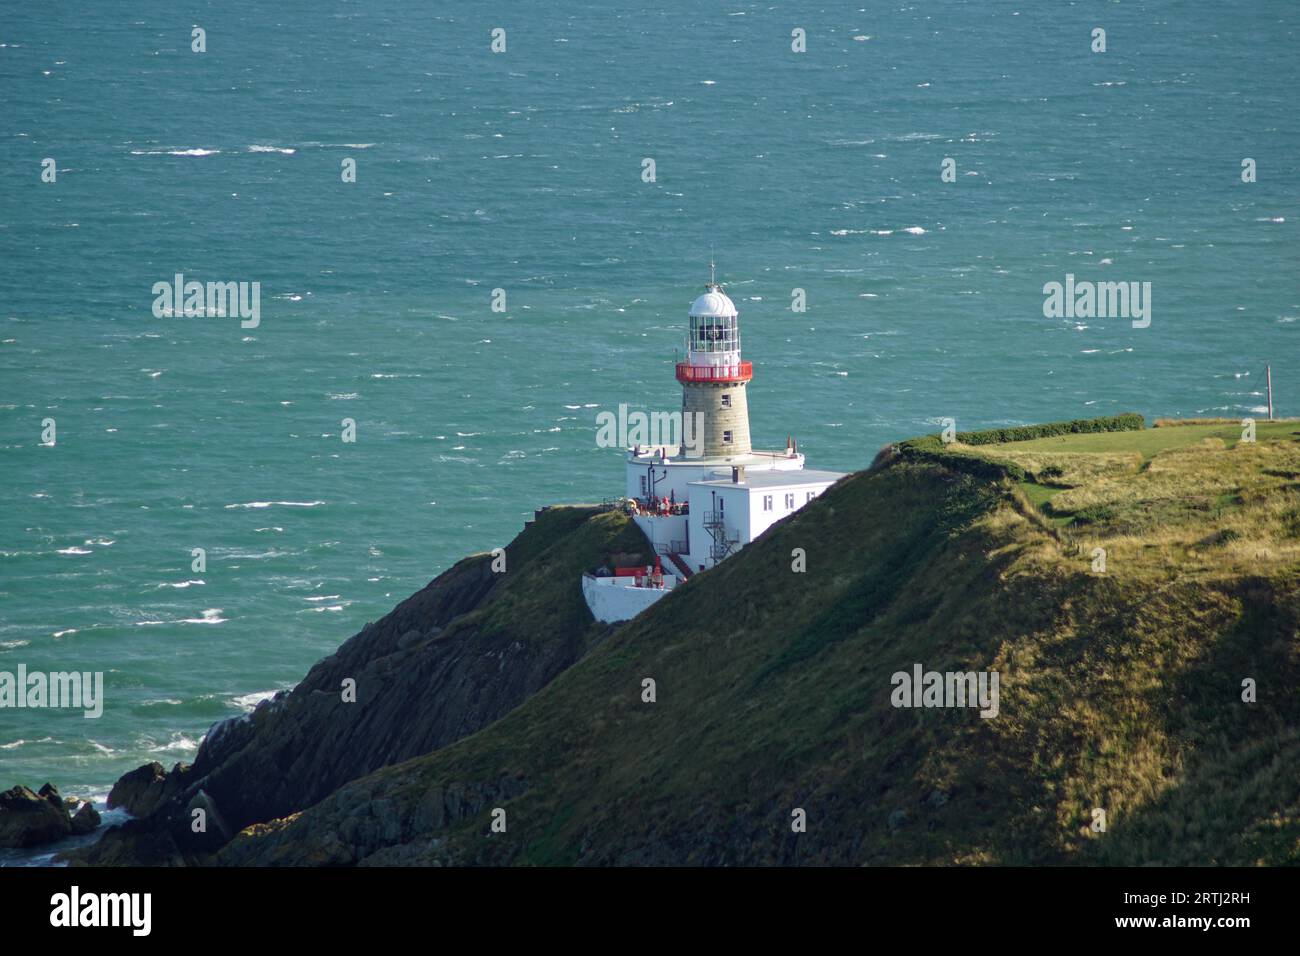 The town of Howth is located on the peninsula Howth Head directly opposite the Dublin district of Sutton and is connected to the mainland via a dam. Stock Photo